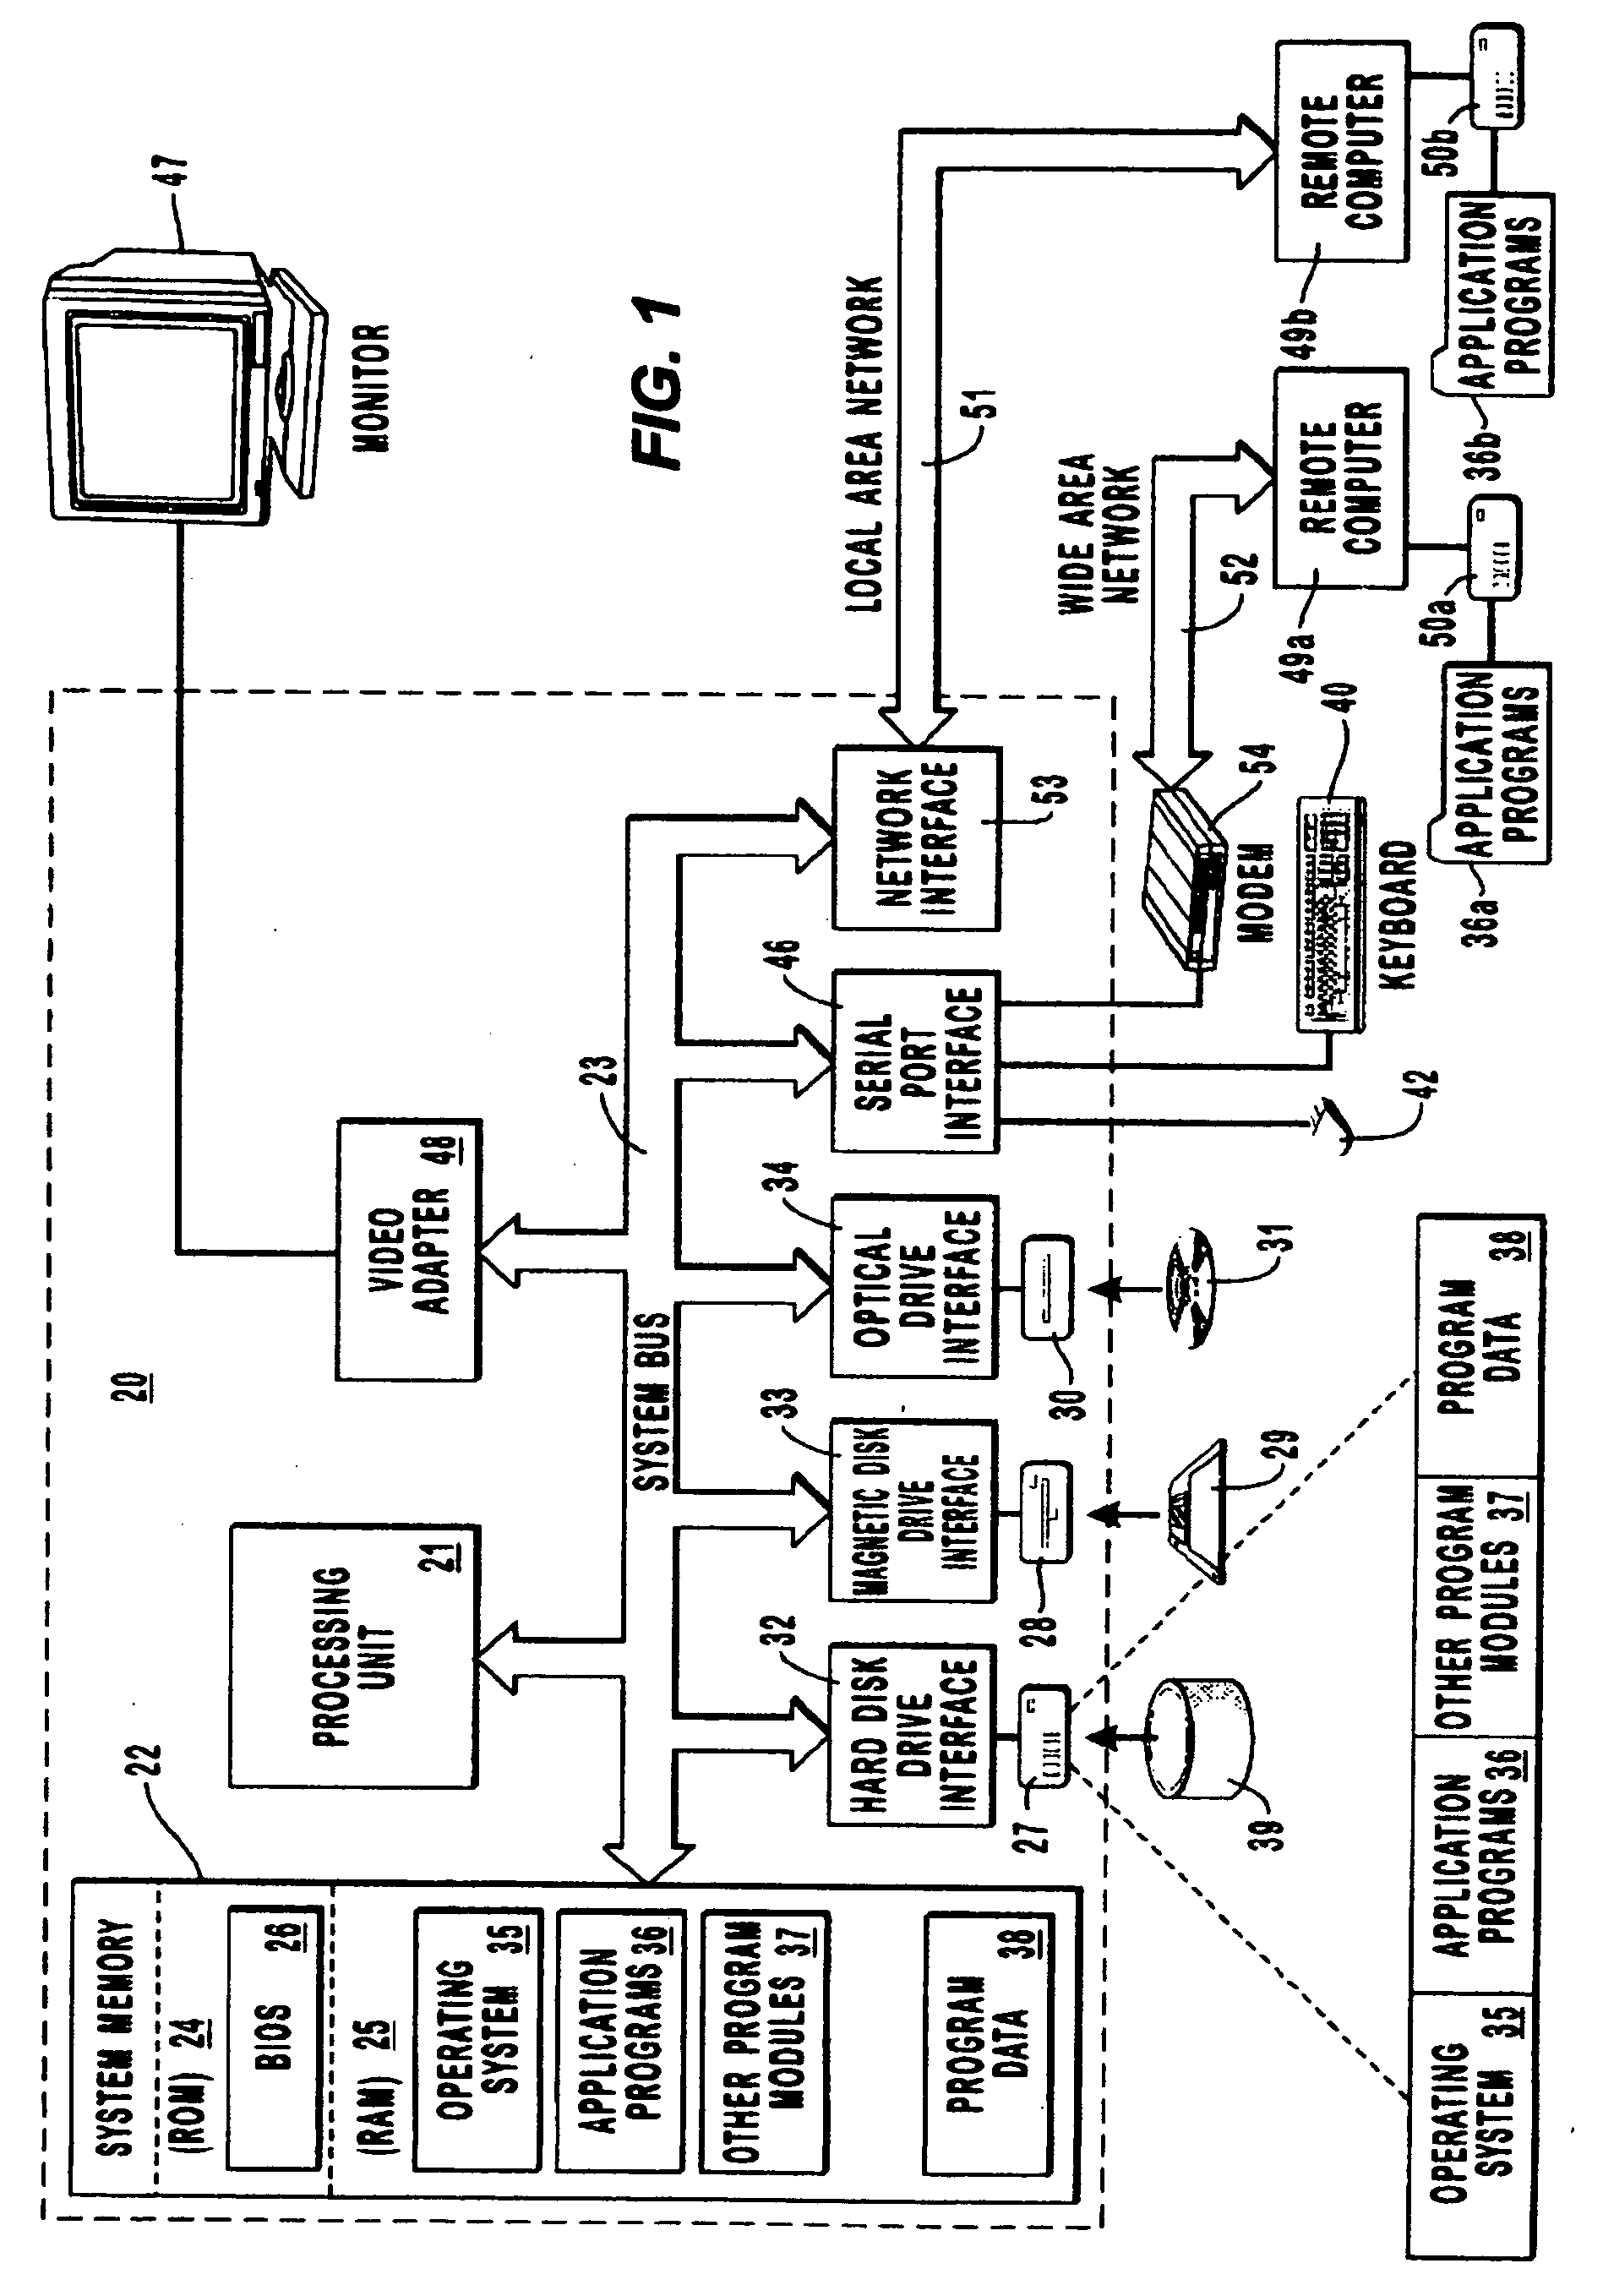 Peer-to-peer network method and system for shipment delivery transactions